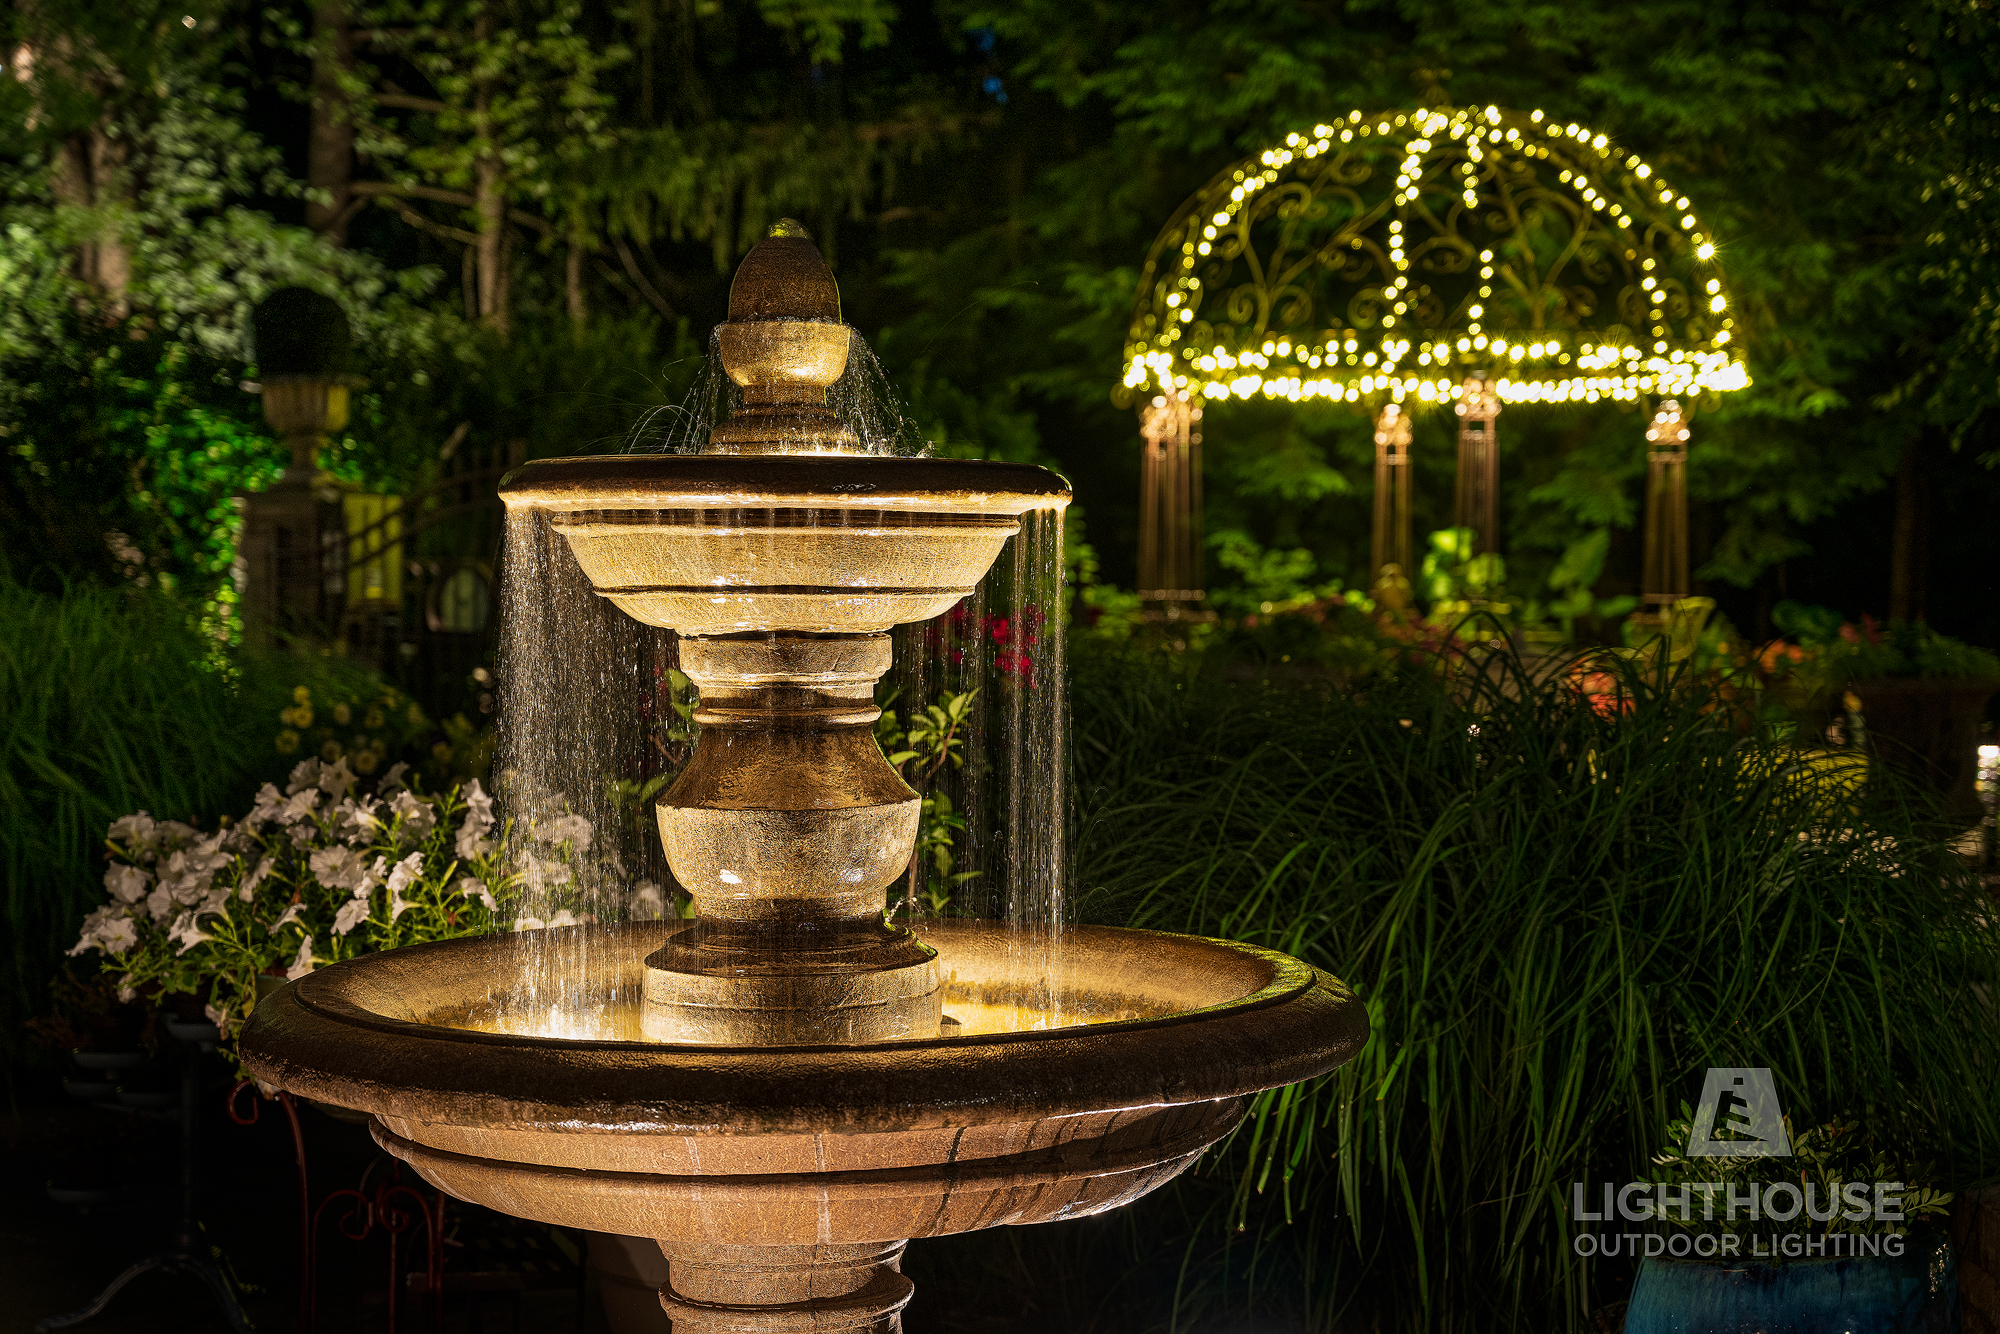 Outdoor Landscape Lighting Company in West Caldwell, NJ